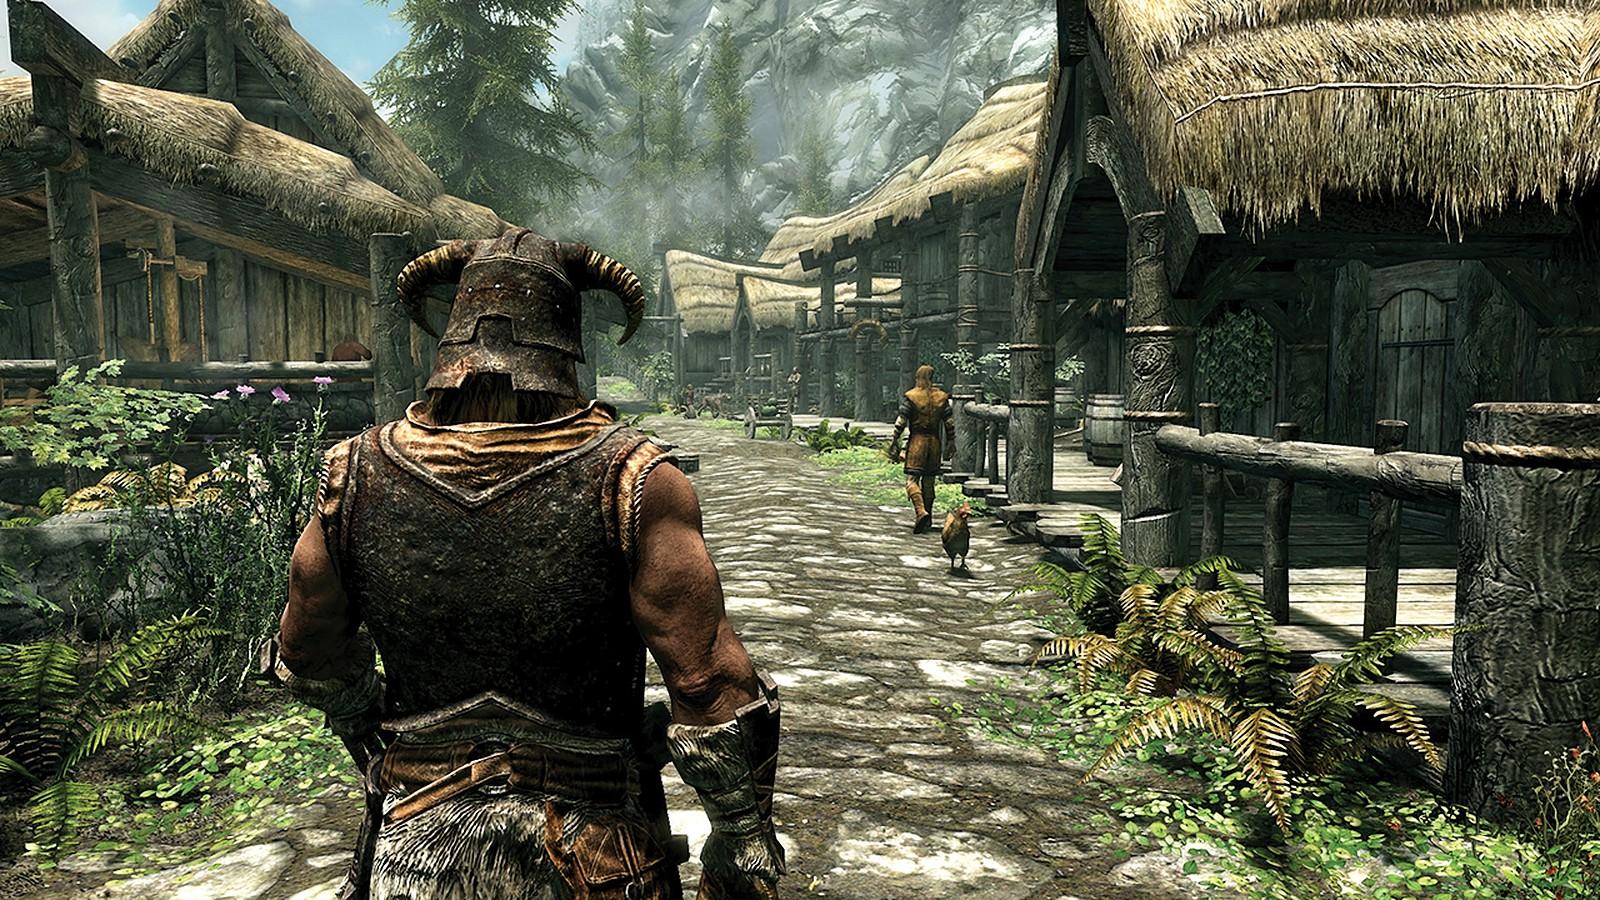 An adventurer sets out on their journey into Skyrim